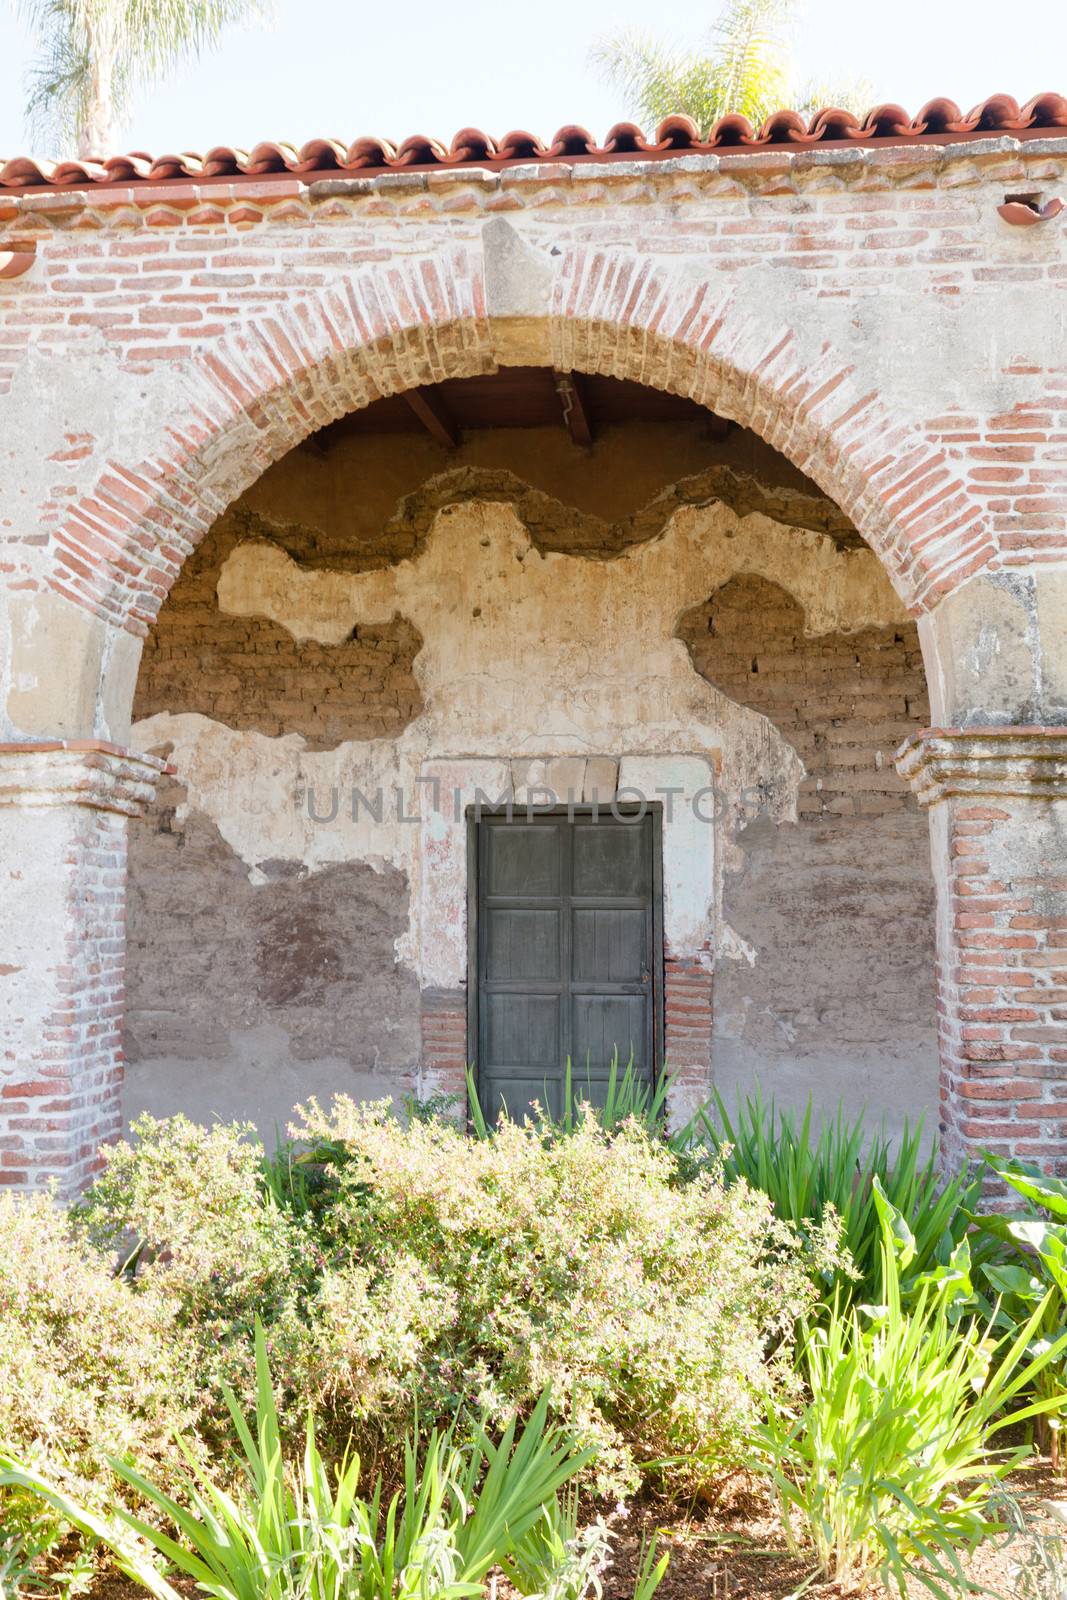 Mission San Juan Capistrano was a Spanish mission in Southern California, located in present-day San Juan Capistrano. It was founded on All Saints Day November 1, 1776, by Spanish Catholics of the Franciscan Order.